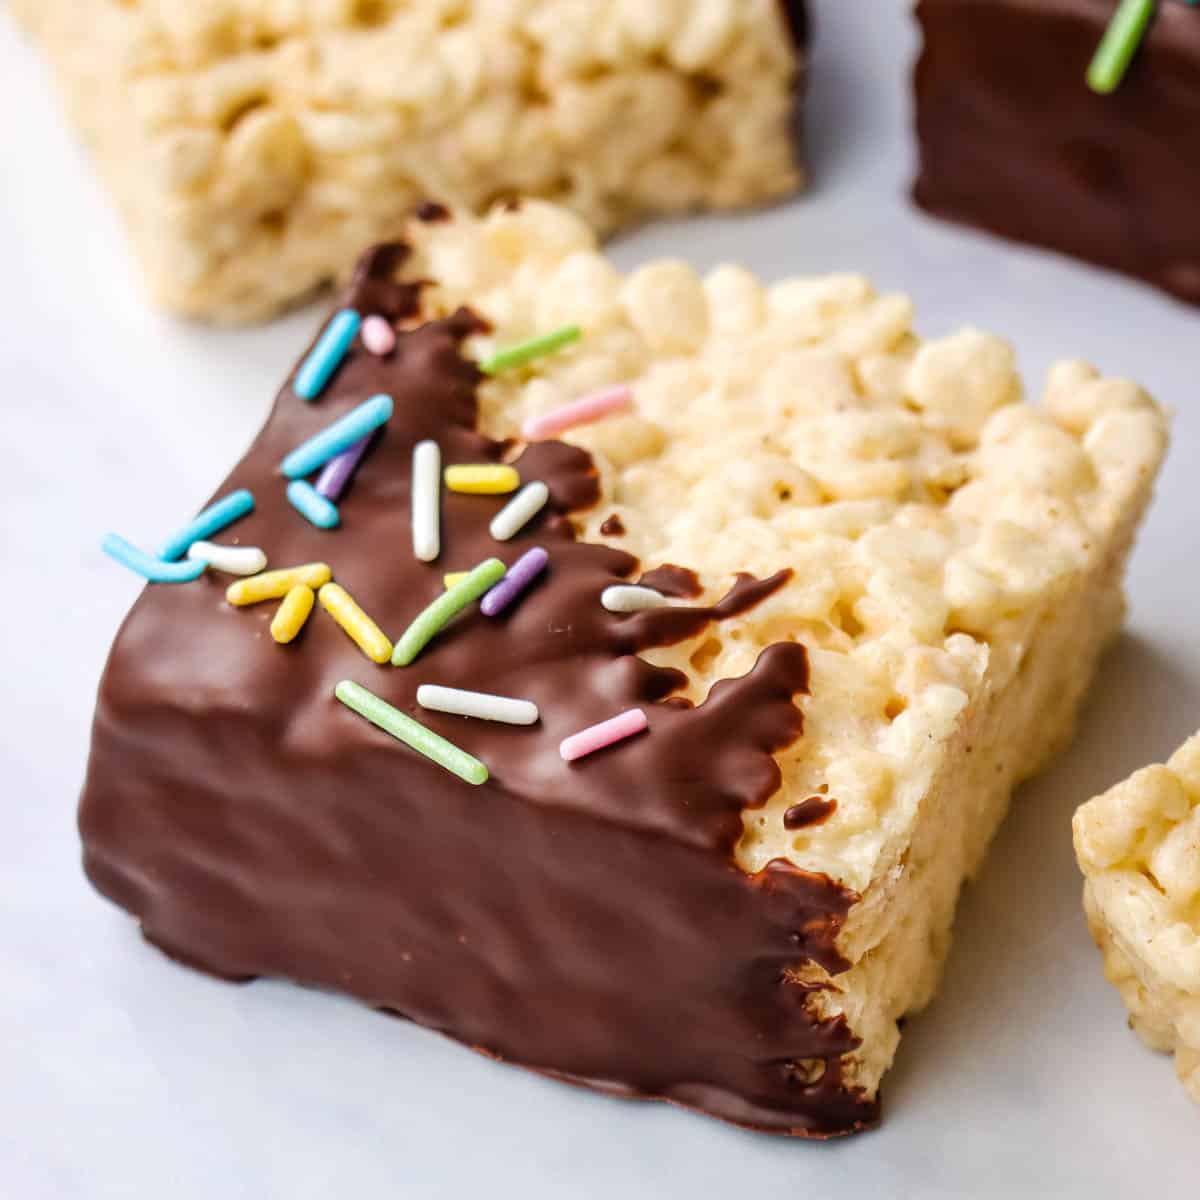 A rice krispie treat cut into a square and dipped diagonally in chocolate and then sprinkled with pastel sprinkles.